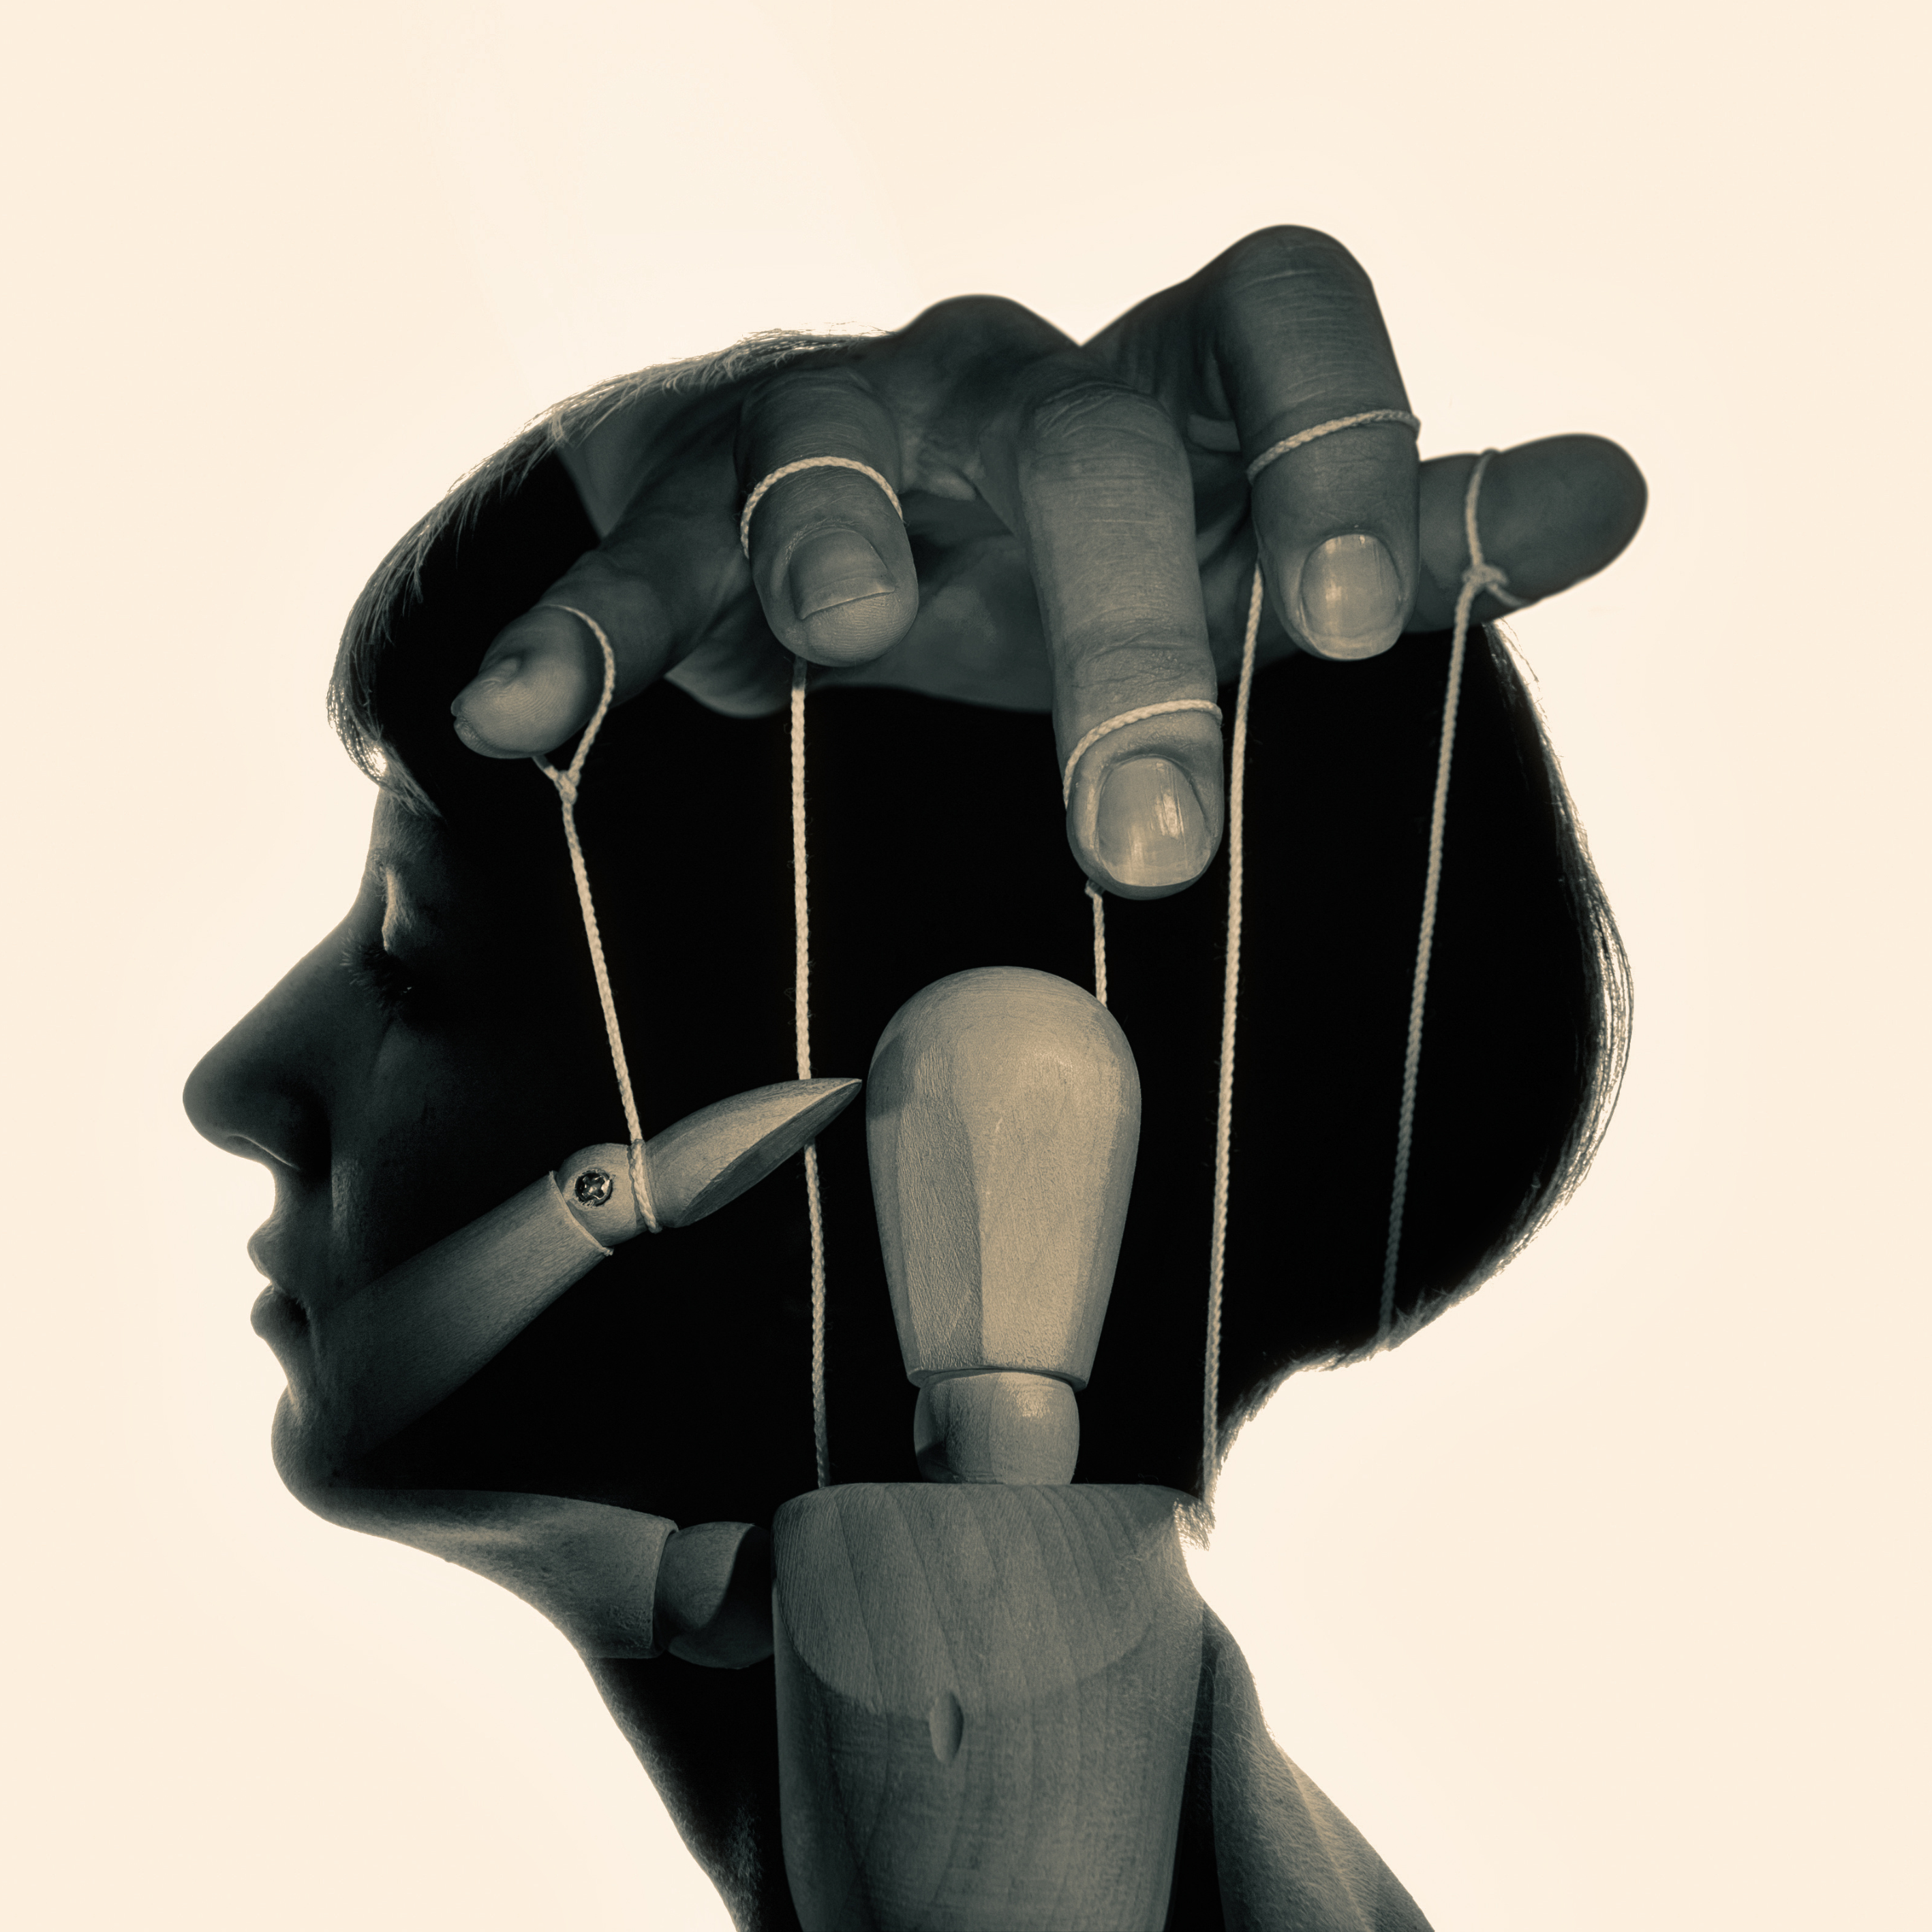 A hand controlling a puppet with strings inside a female head.